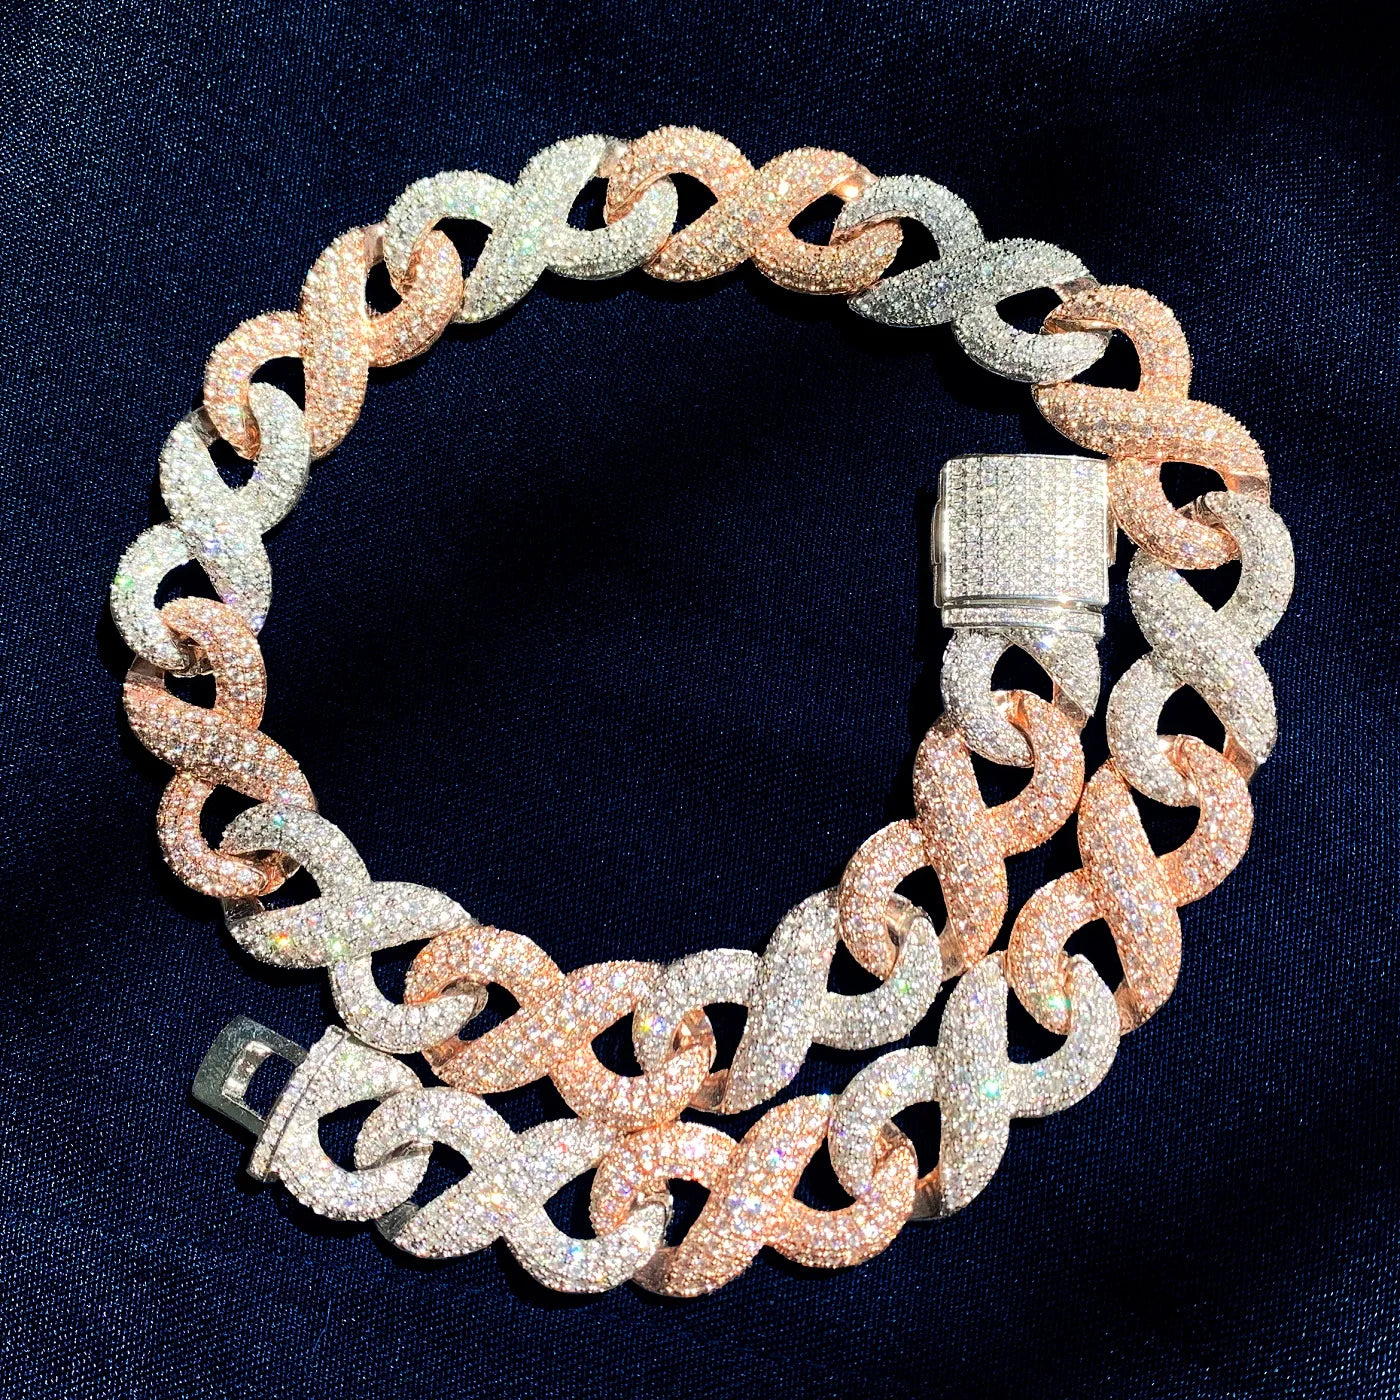 TWO-TONE ROSE GOLD INFINITY CUBAN LINK CHAIN NECKLACE - 15MM